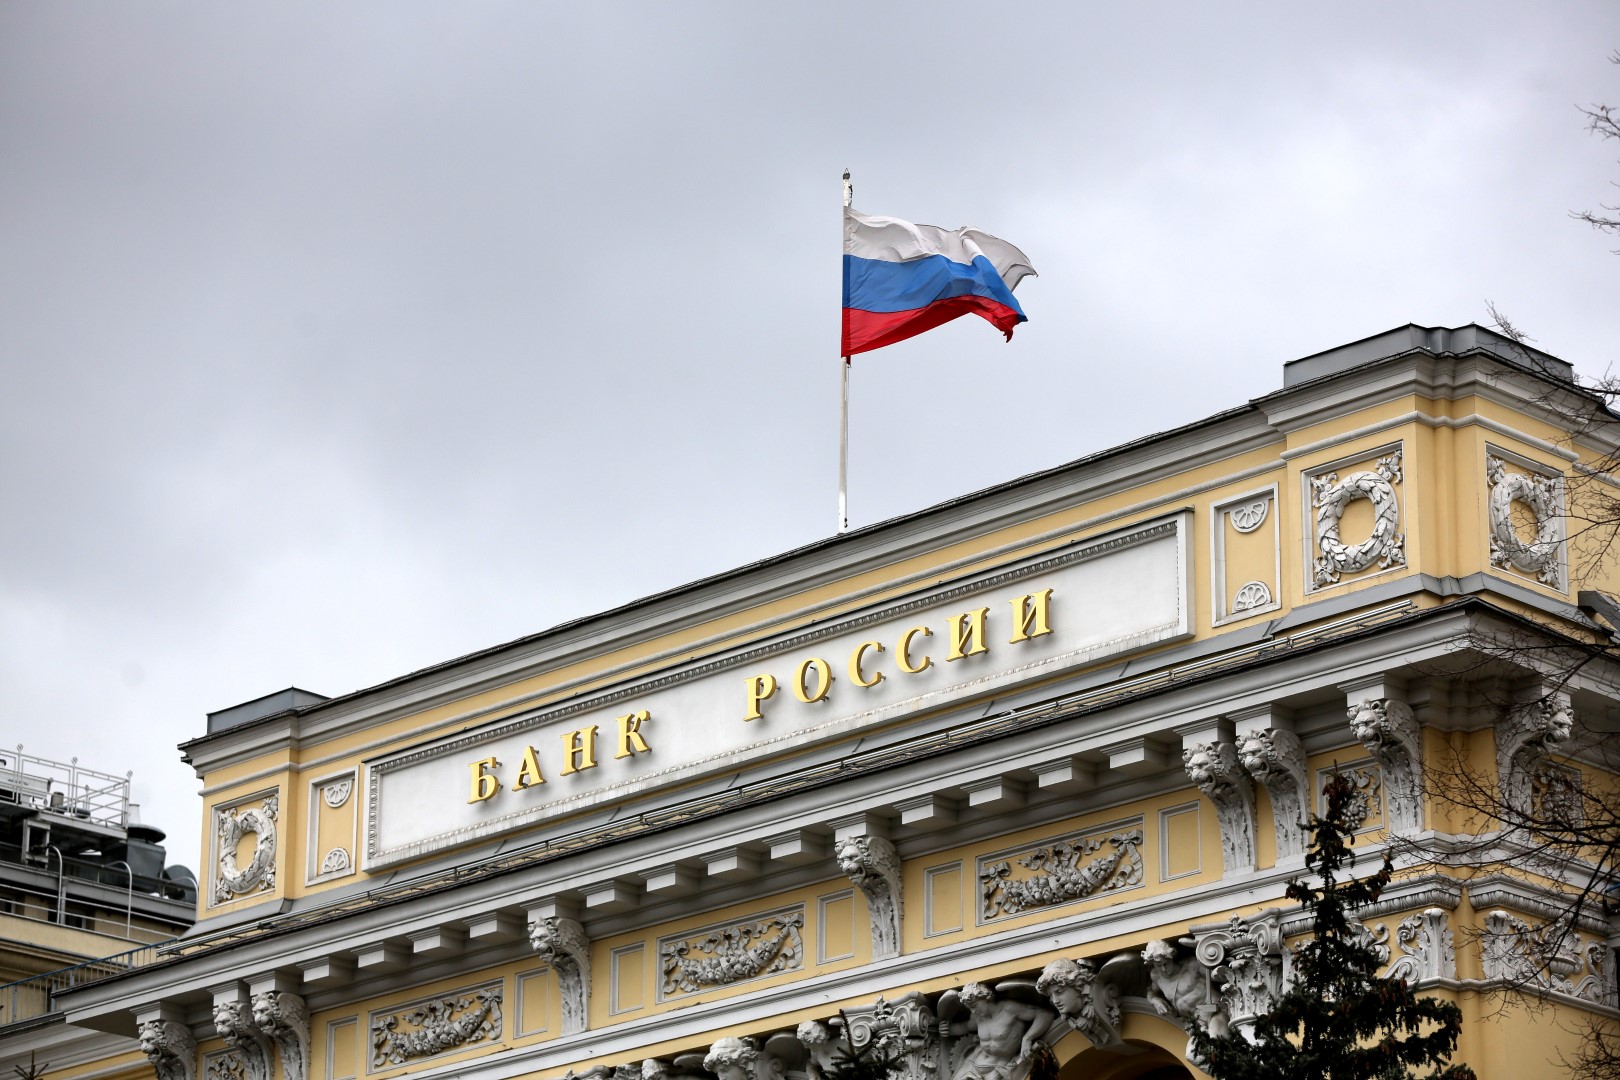 The flag of the Russian Federation flies above the headquarters of the Russian central bank, also known as Bank Rossii, in Moscow, Russia, on Friday, March 18, 2016. Russia's central bank kept its benchmark interest rate unchanged for a fifth meeting amid risks to inflation, warning that its "moderately tight" monetary policy may last longer than previously planned. Photographer: Andrey Rudakov/Bloomberg